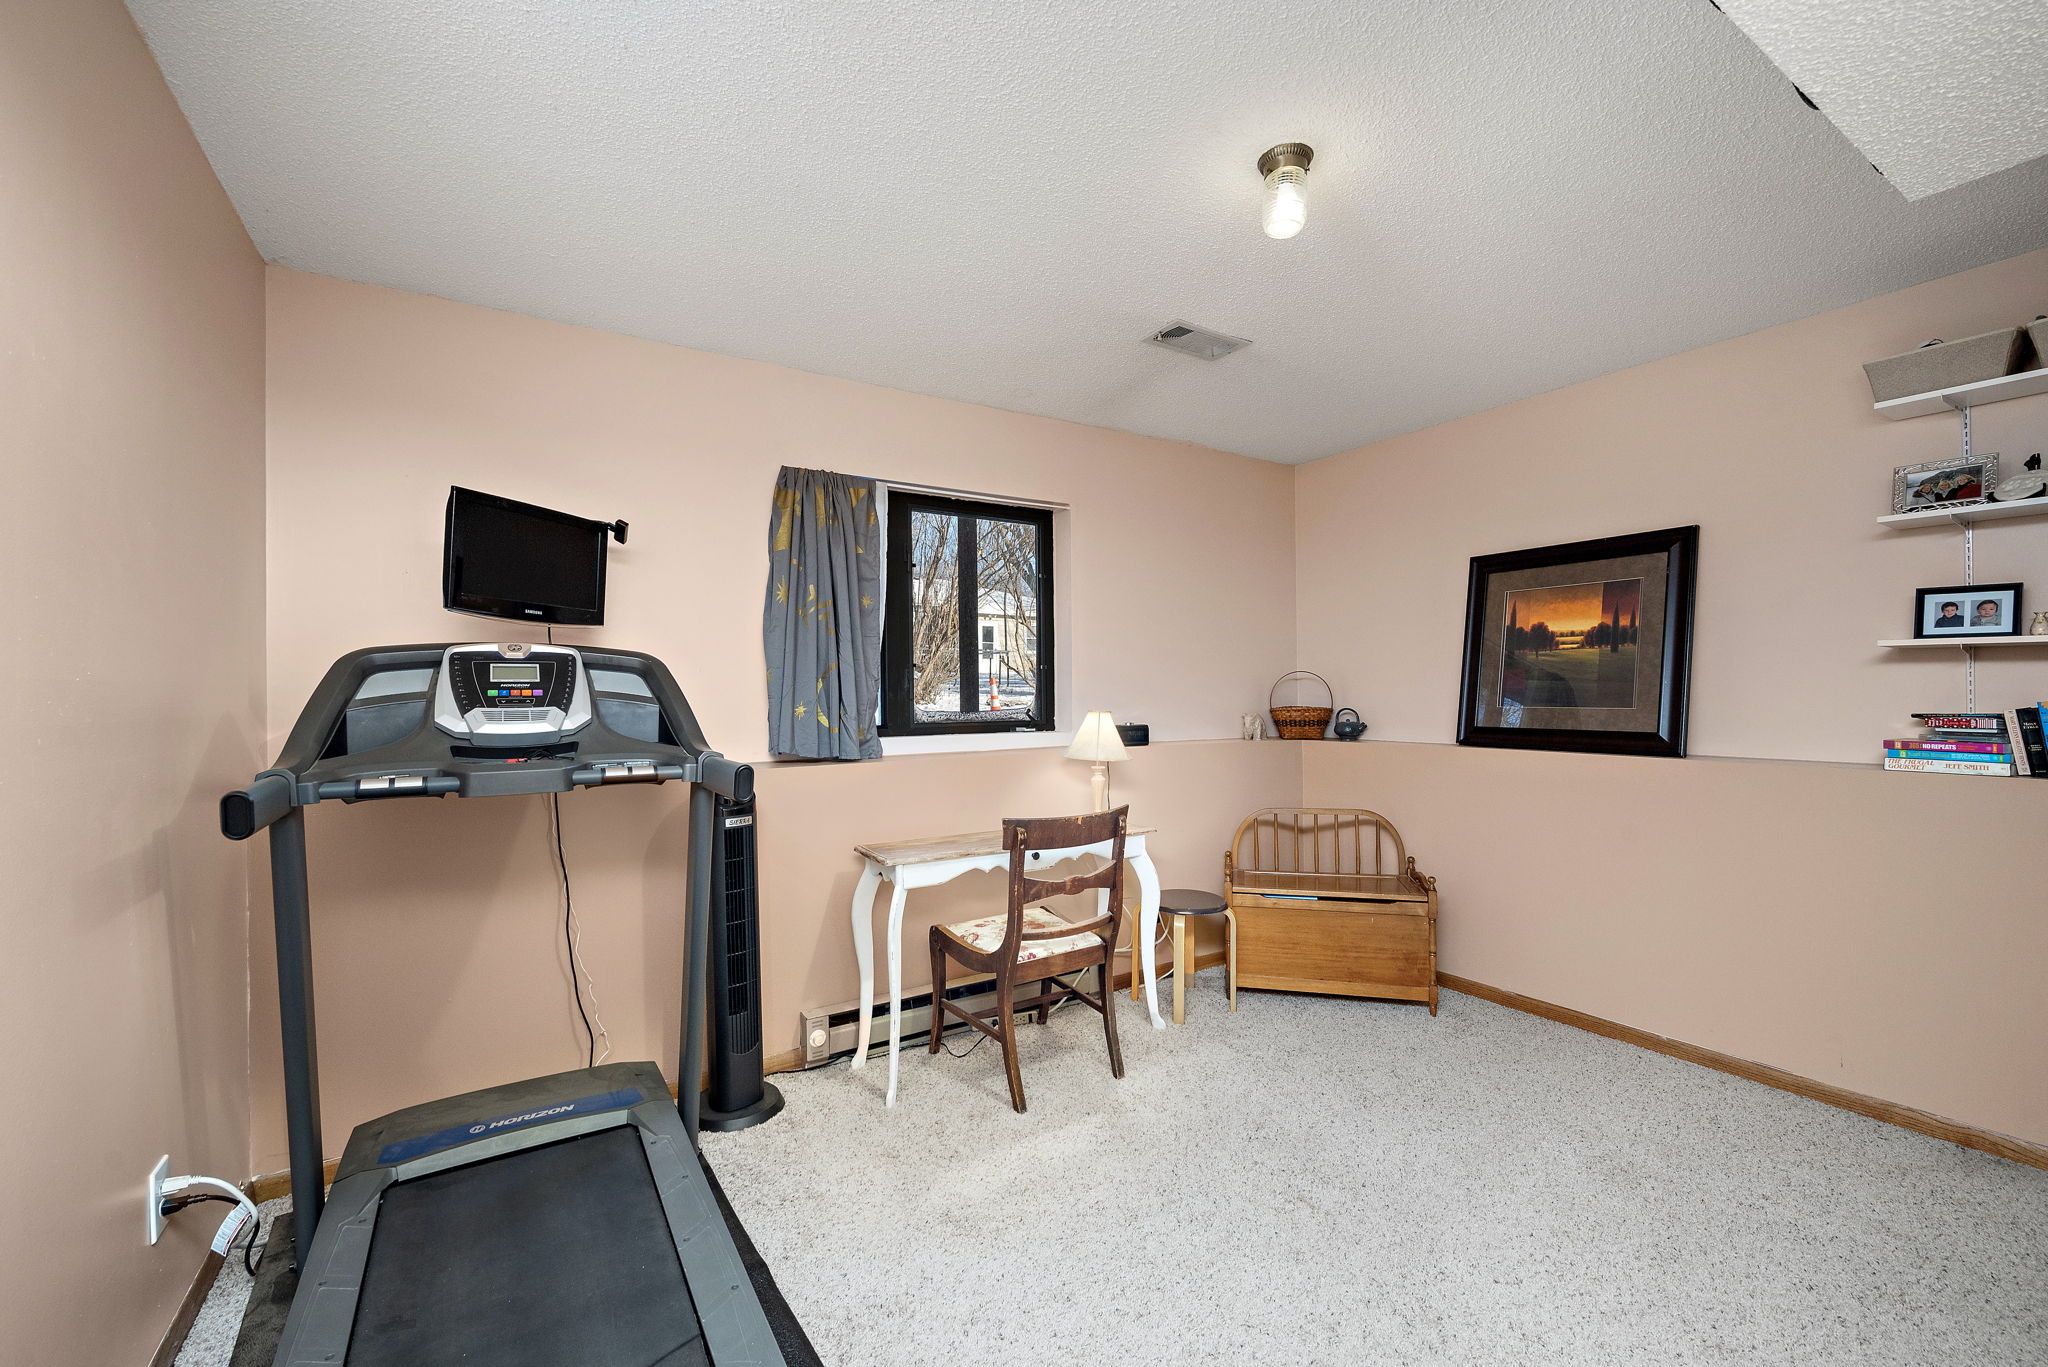 Third bedroom, office, work out space depending on your needs!